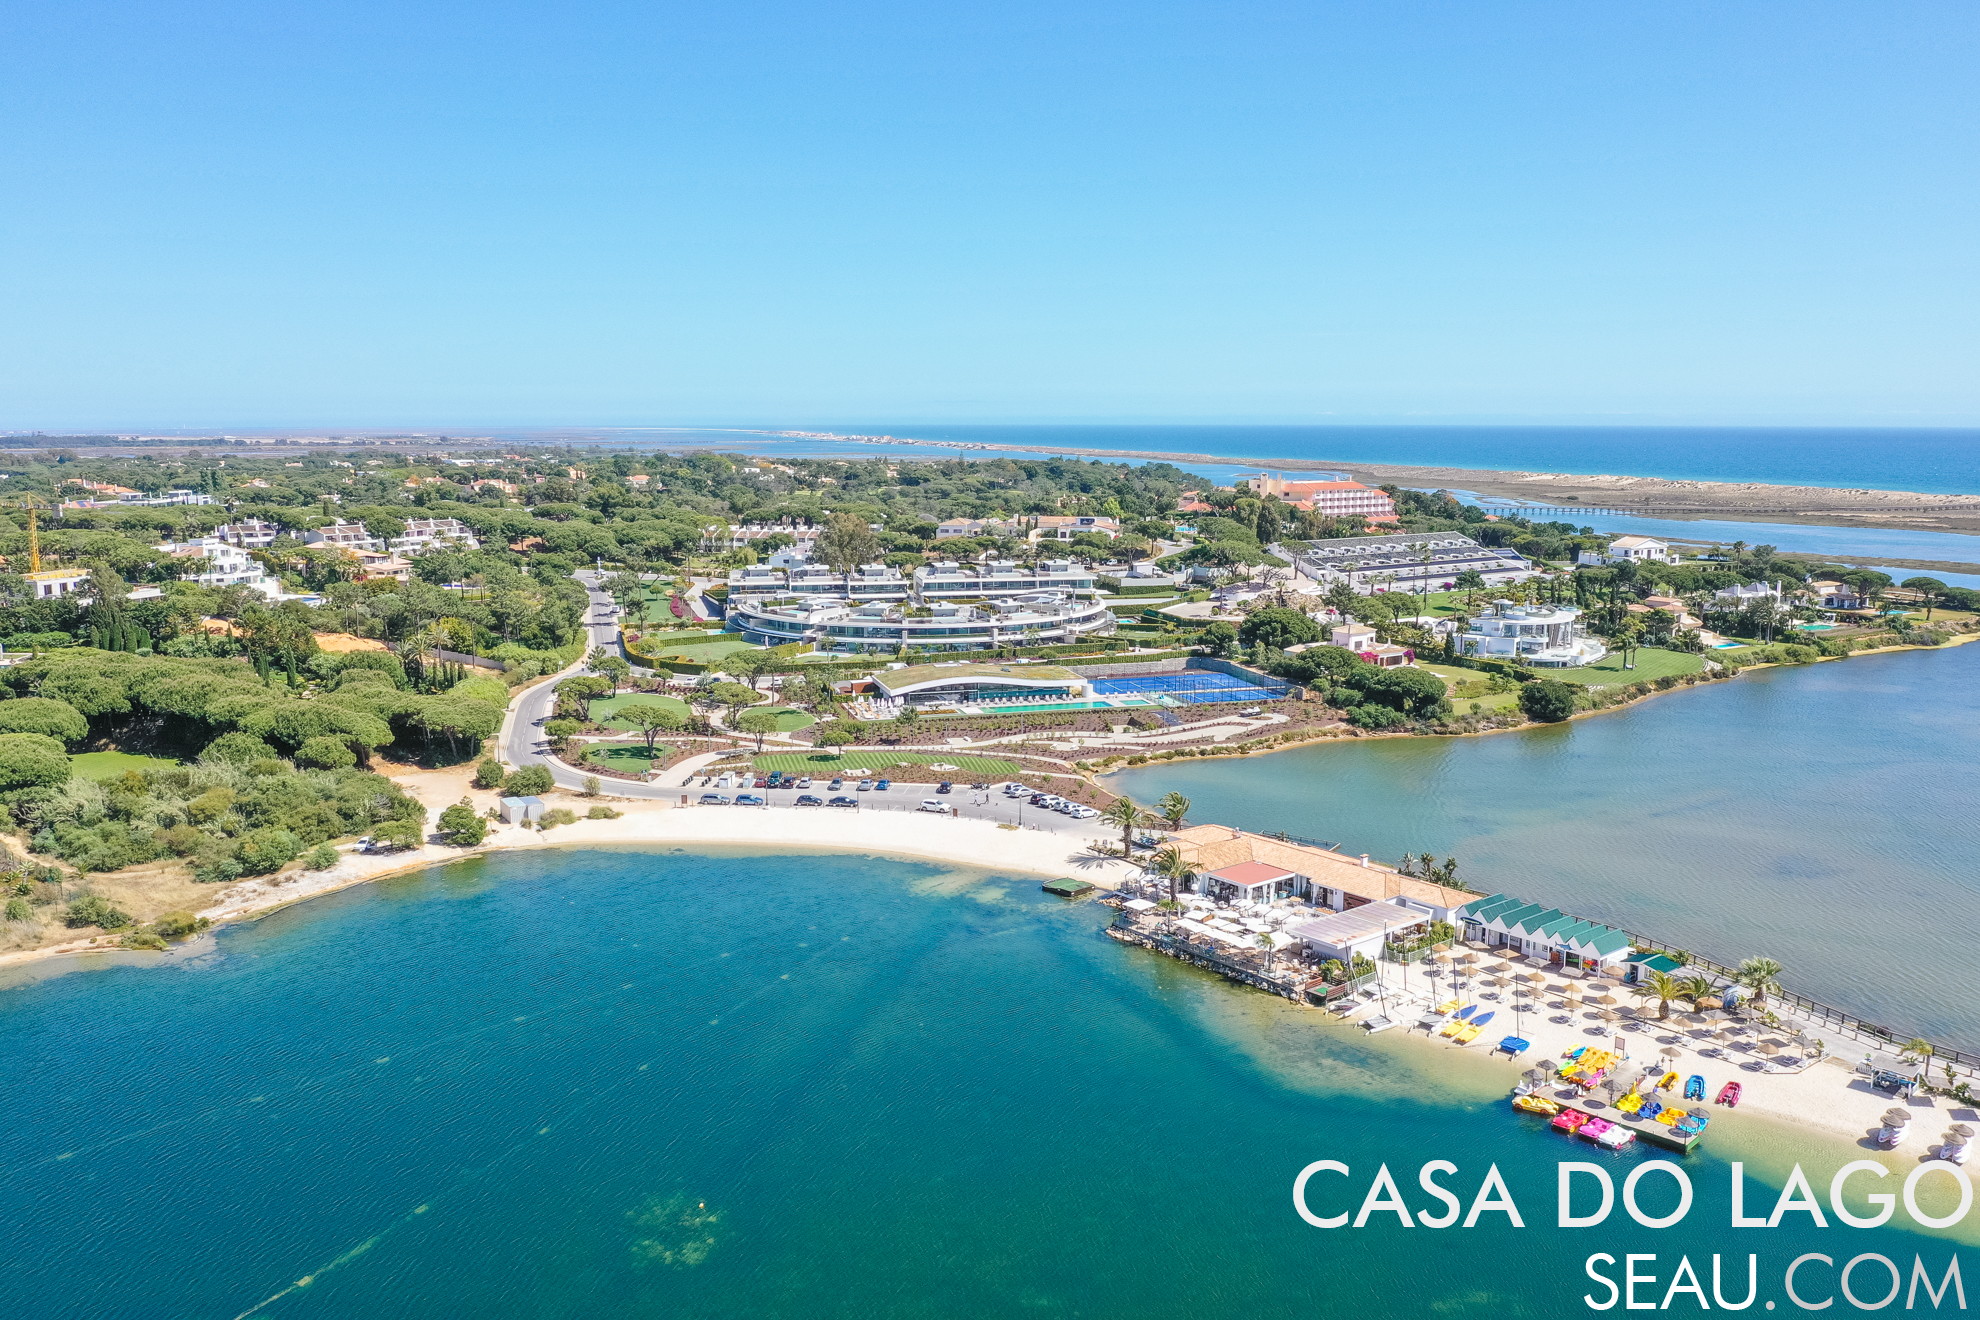 View of the origin of Quinta do Lago. In this image we can see next to the nautical club, the current restaurant Casa do Lago, built from the existing ruin of Casa Velha, an old agricultural house in the original Quinta dos Ramalhos. Behind the slope, in the center of the image is the "Reserva", the luxury development facing the lake.